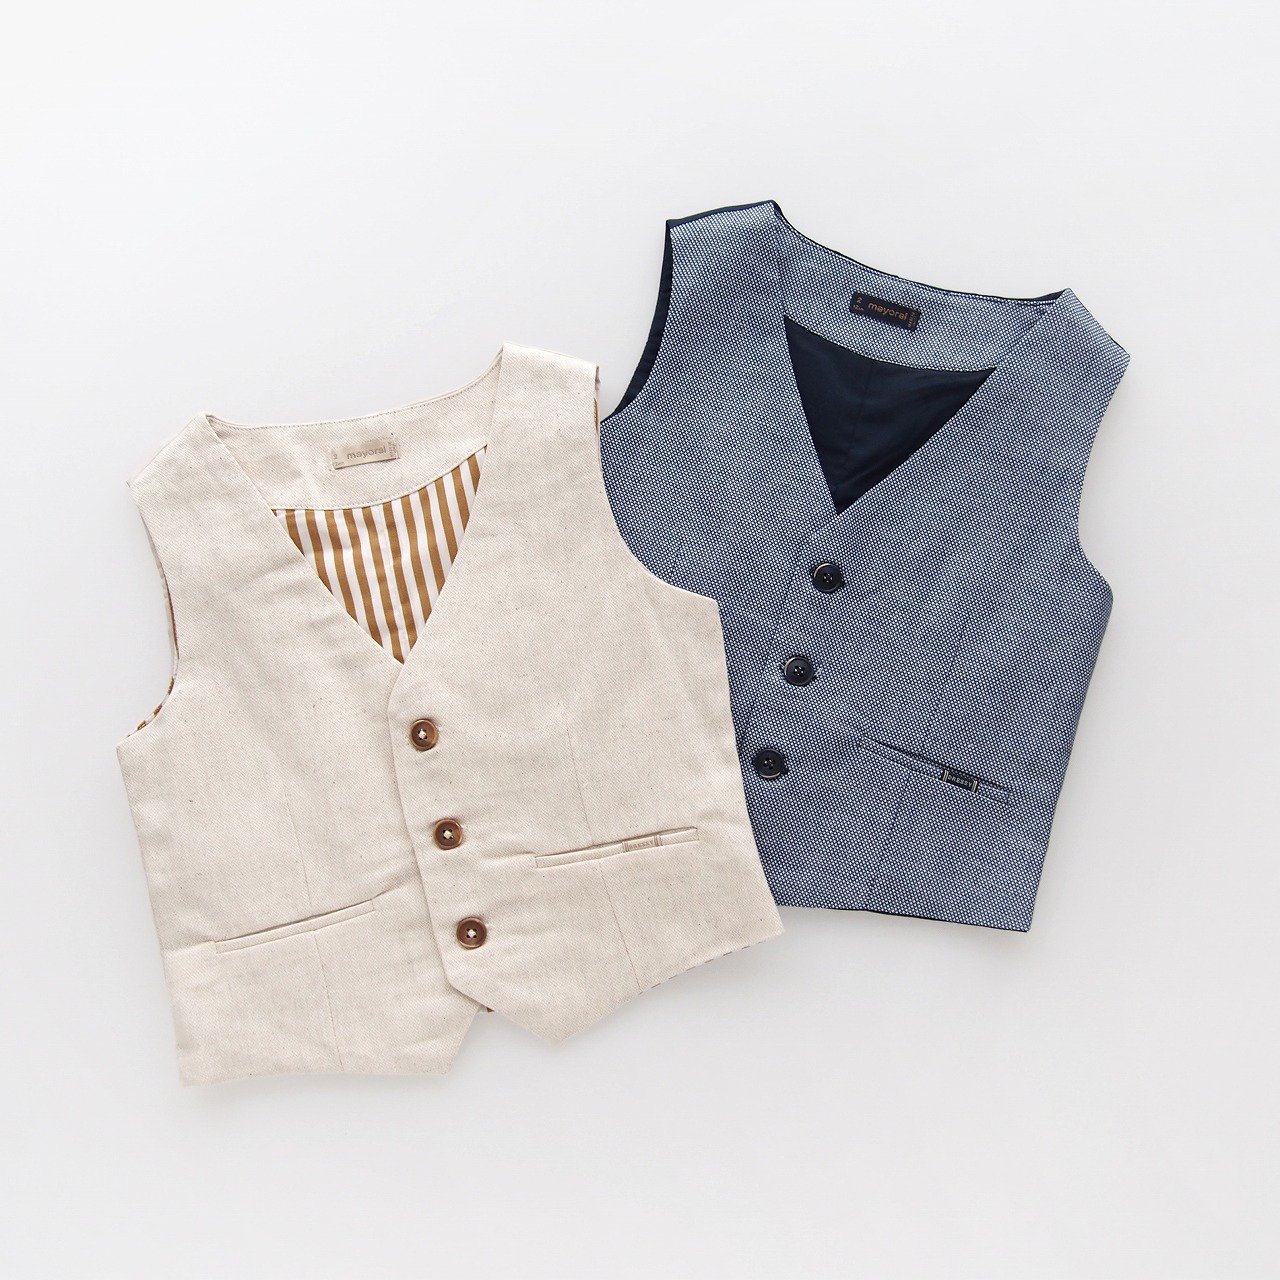 <img class='new_mark_img1' src='https://img.shop-pro.jp/img/new/icons2.gif' style='border:none;display:inline;margin:0px;padding:0px;width:auto;' />30% - Mayoral - Dressy gilet (Navy/ Beige)